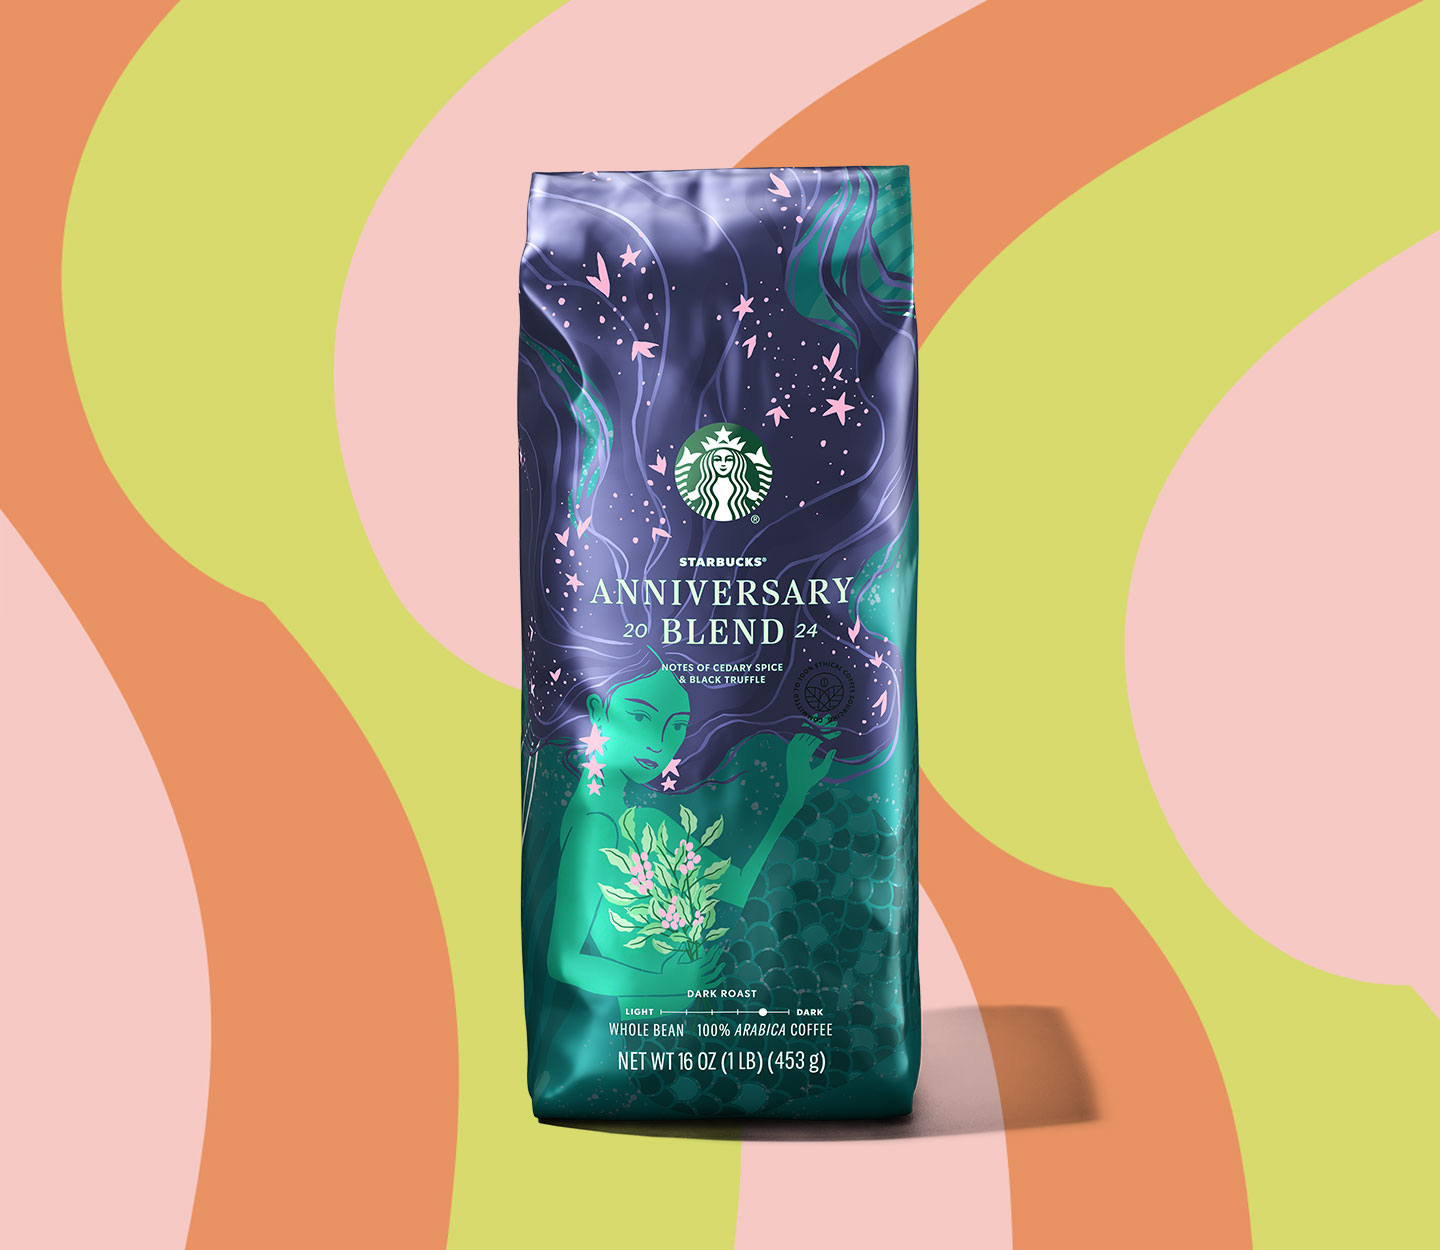 Dark-blue coffee bag with an illustration of the Starbucks siren in green.